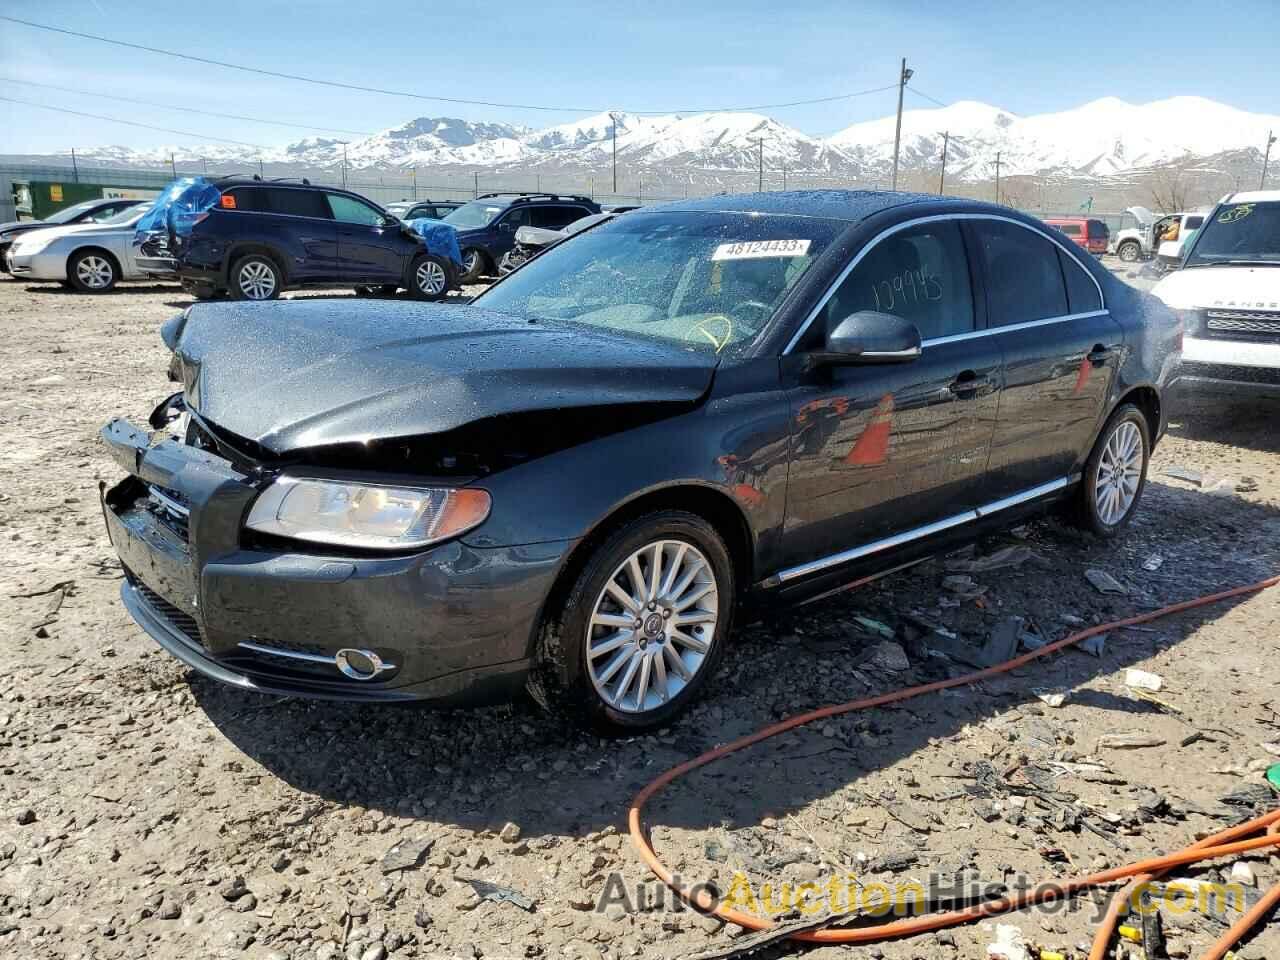 2012 VOLVO S80 3.2, YV1940AS4C1162671